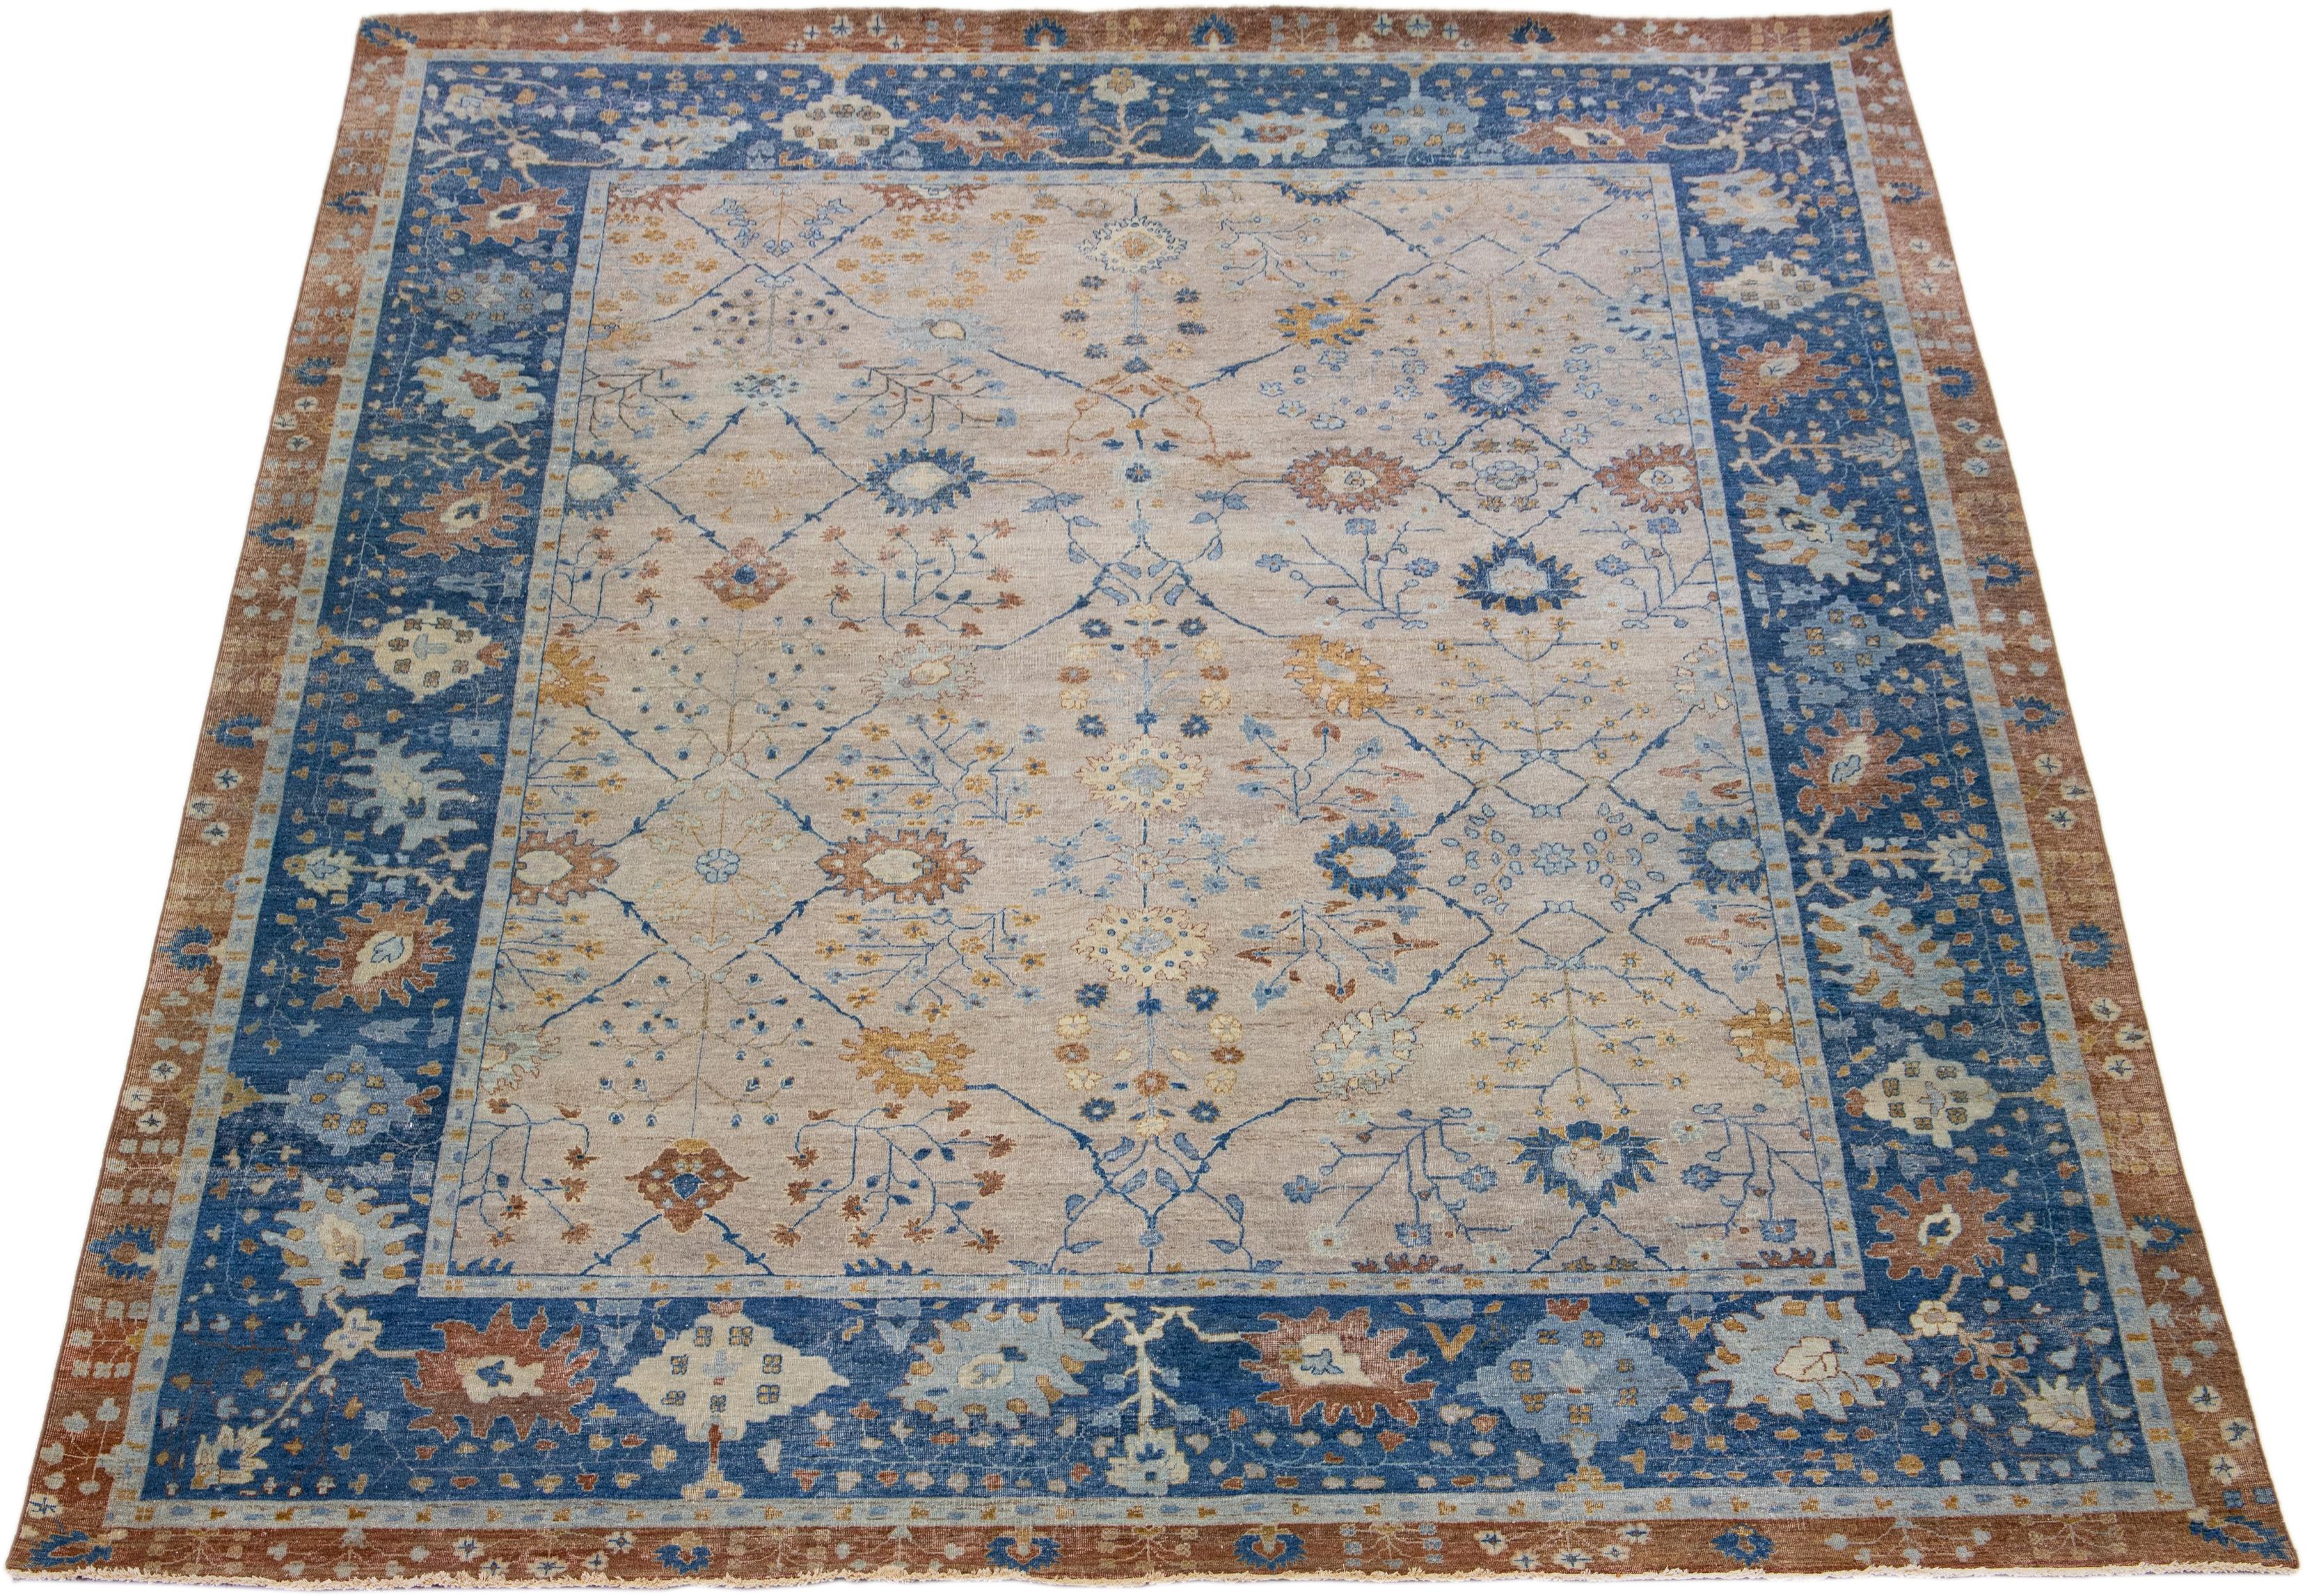 Apadana's Artisan Line is an antique rug reimaging with an elegant way to inject a striking antique aesthetic into a space. This line of rugs is decidedly unique and reimagines what an antique rug look can be. Every single piece from our Artisan